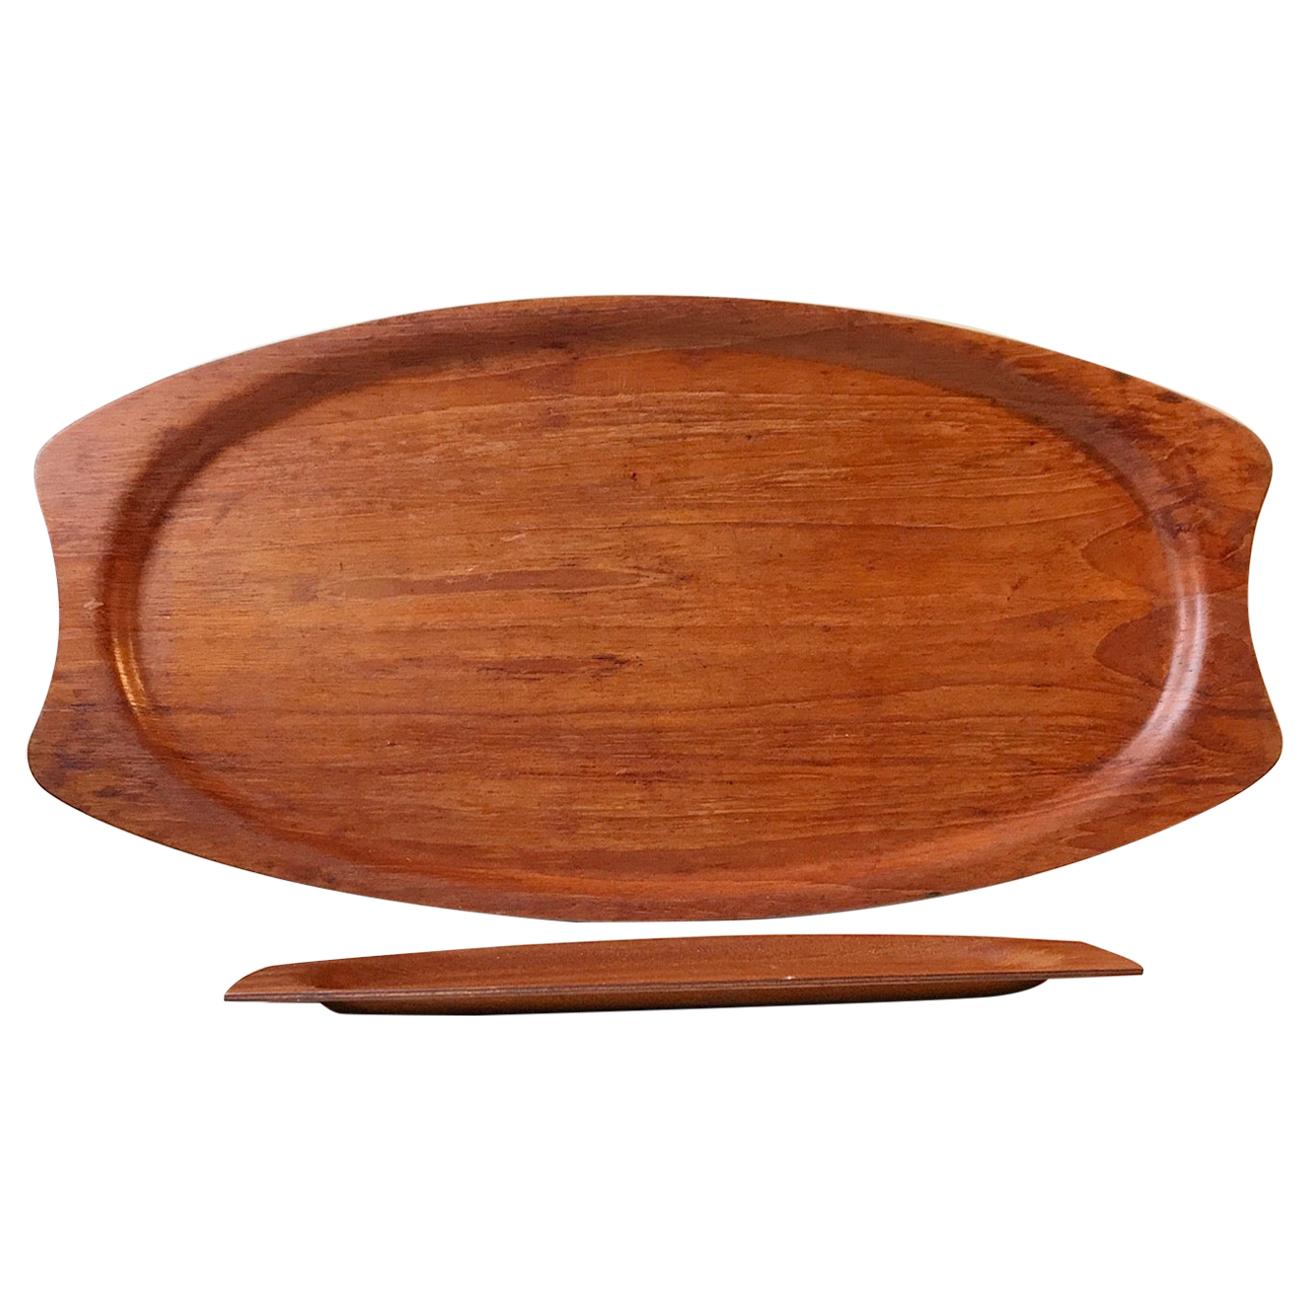 Large and Small Midcentury Scandinavian Teak Serving Tray Set, 1960s For Sale